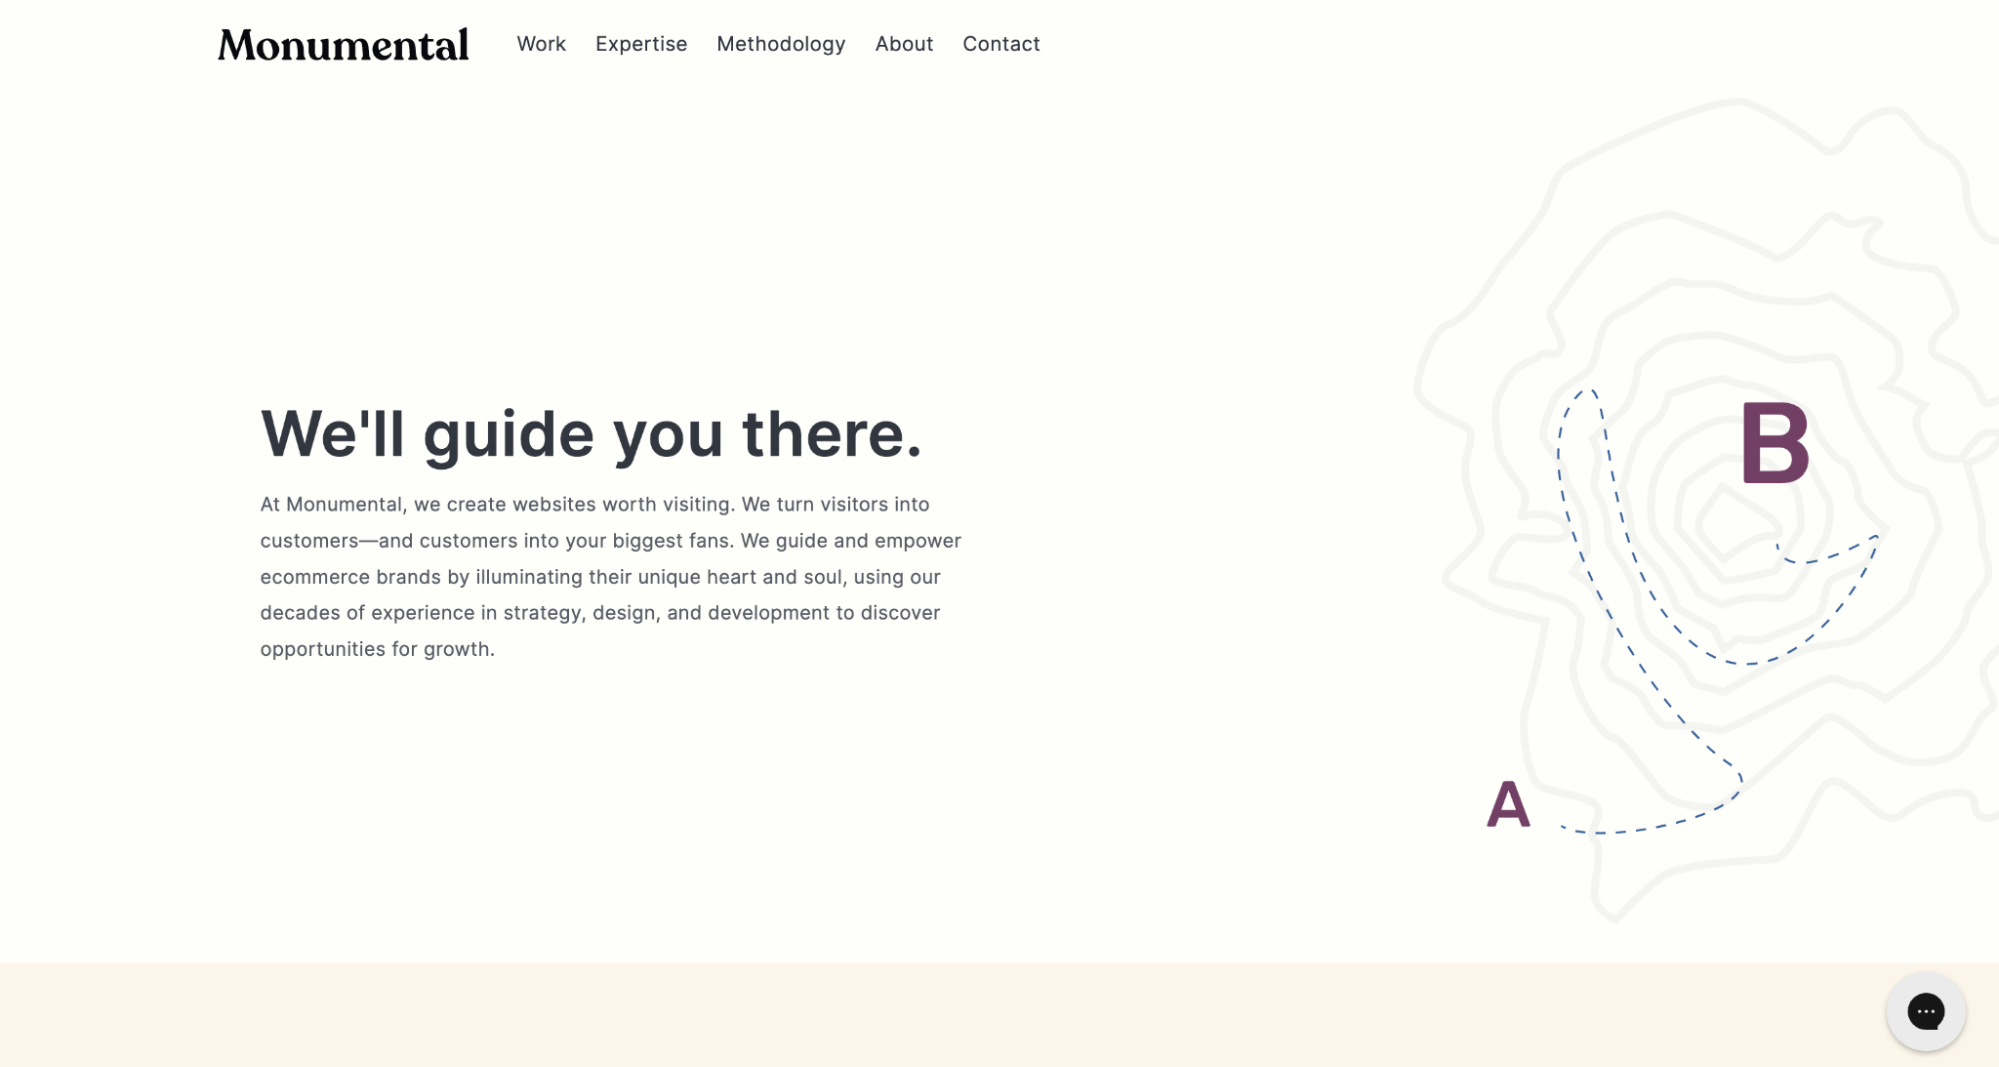 Monumental consultants homepage with a minimalist design including an abstract topology map.